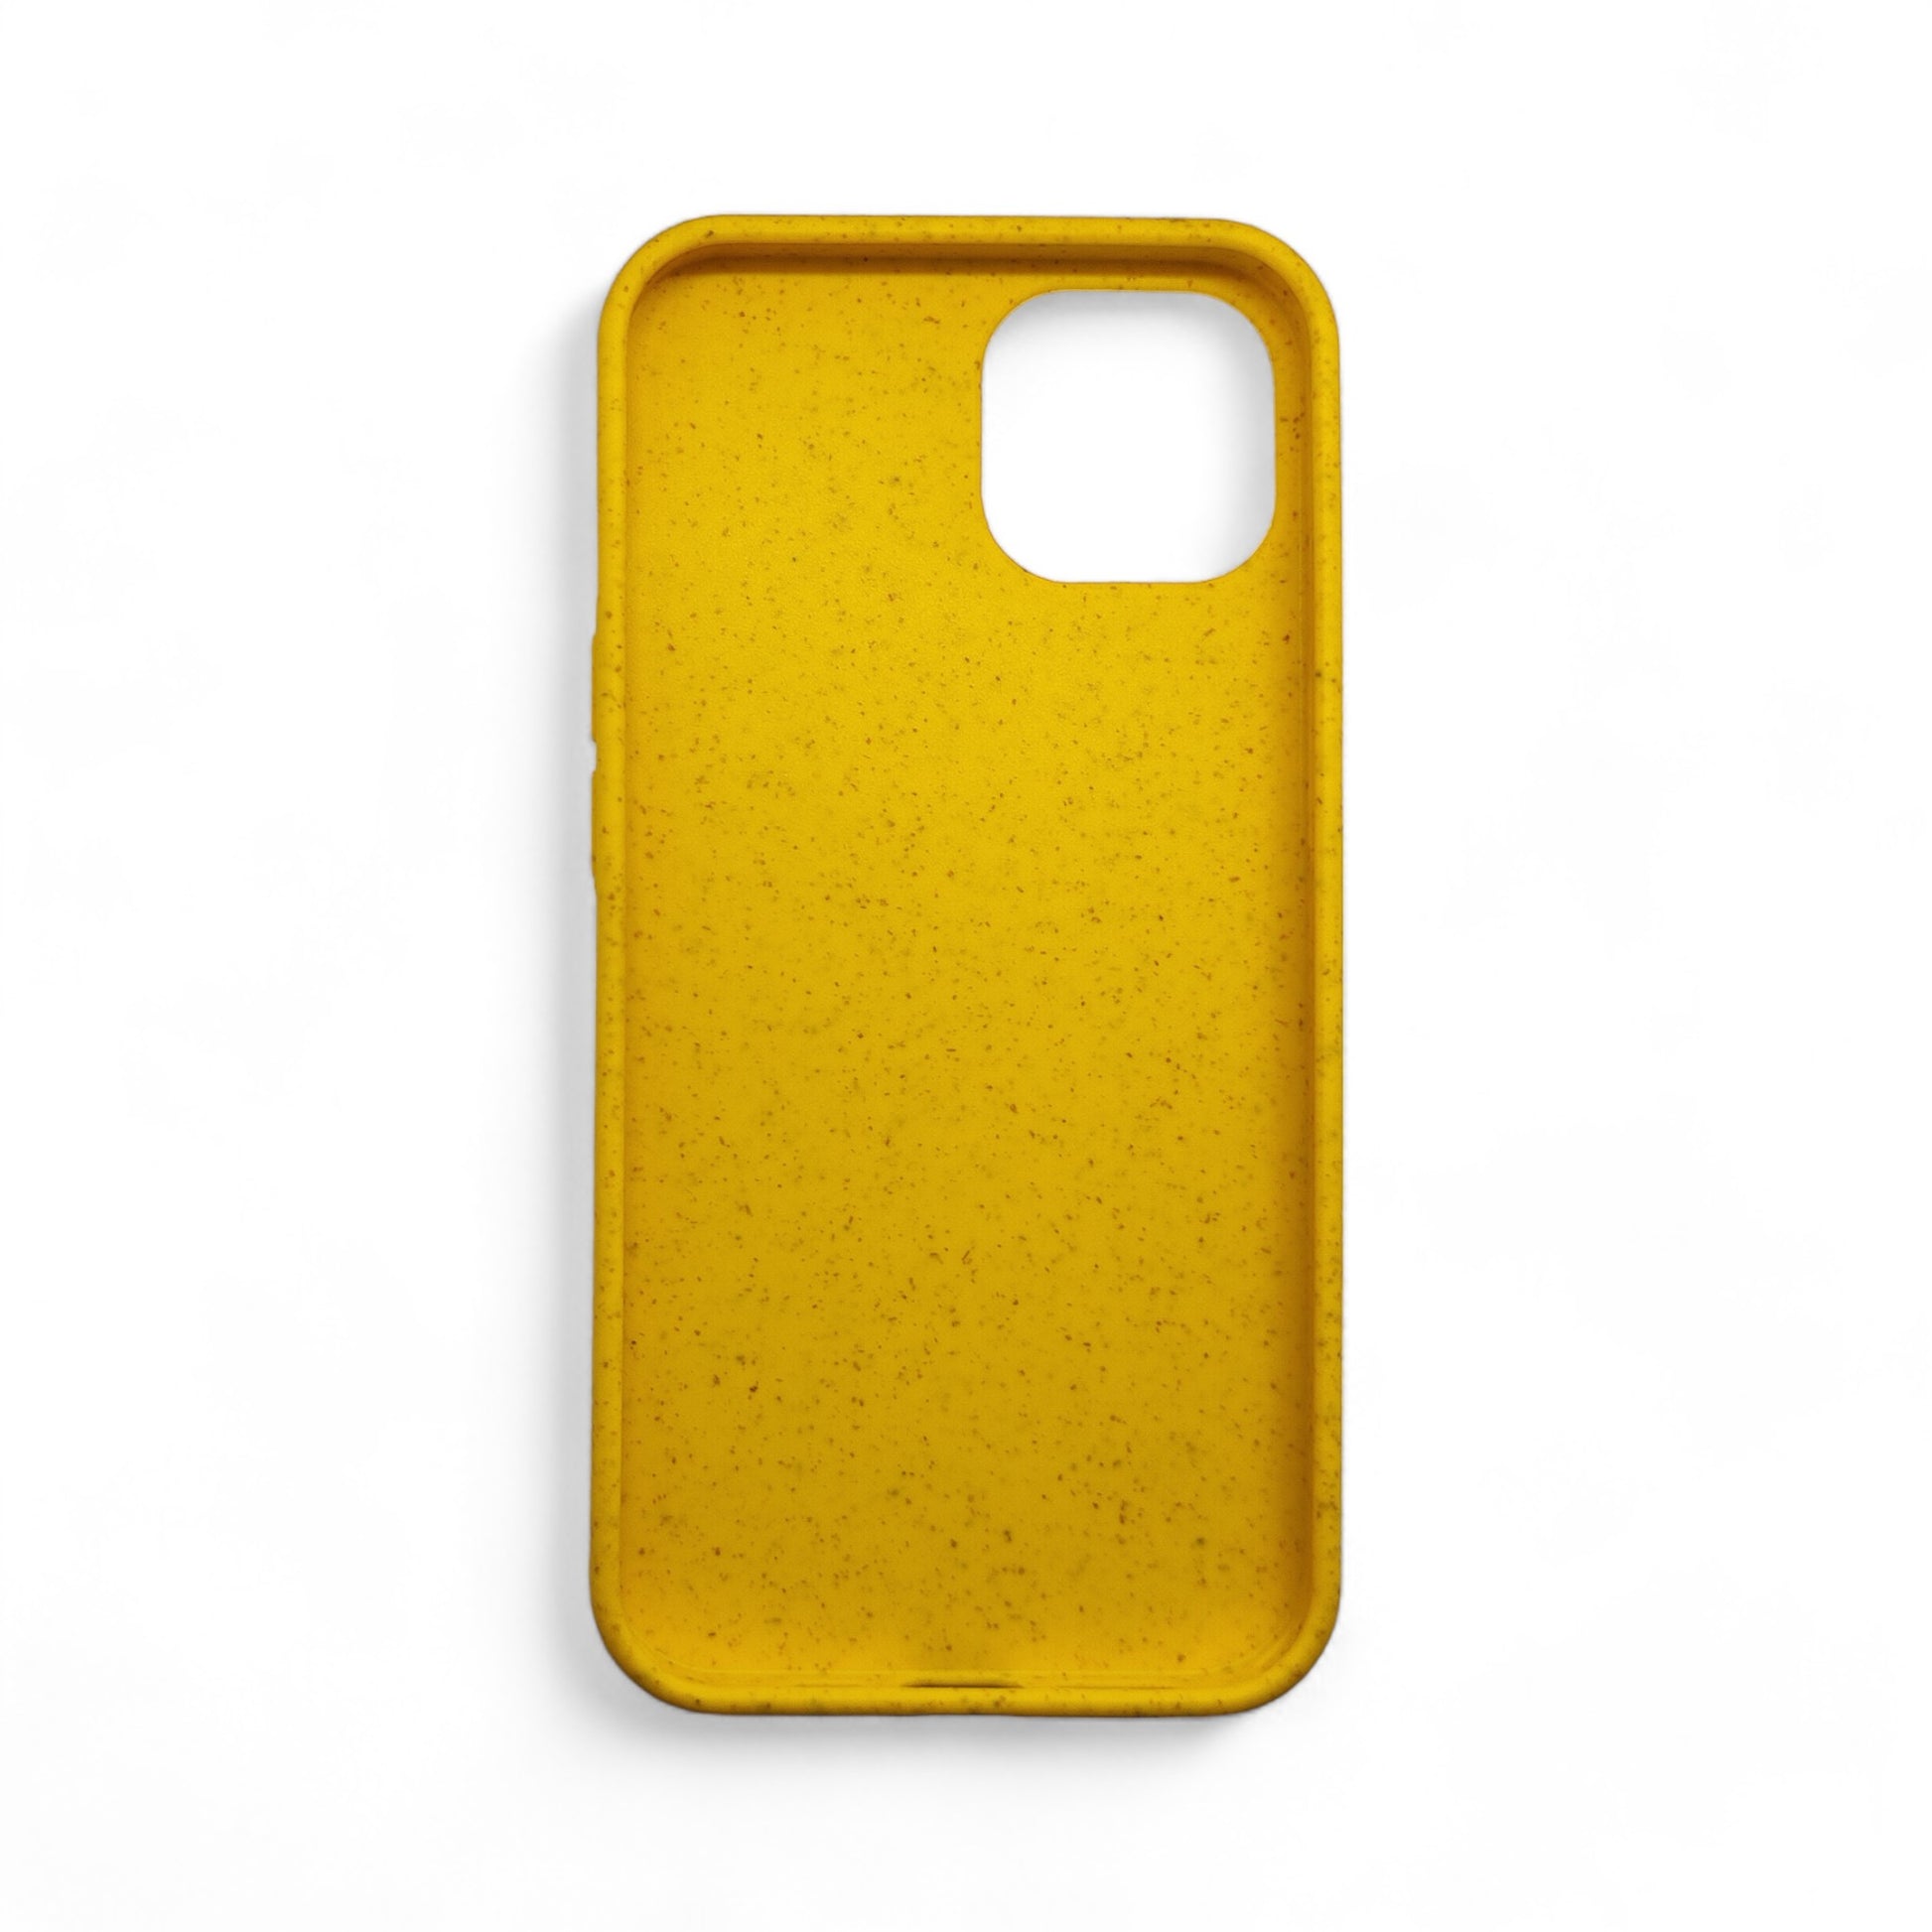 Compostable iPhone Case - Yellow - Tallpine Cases | Sustainable and Eco-Friendly - Solid color Yellow